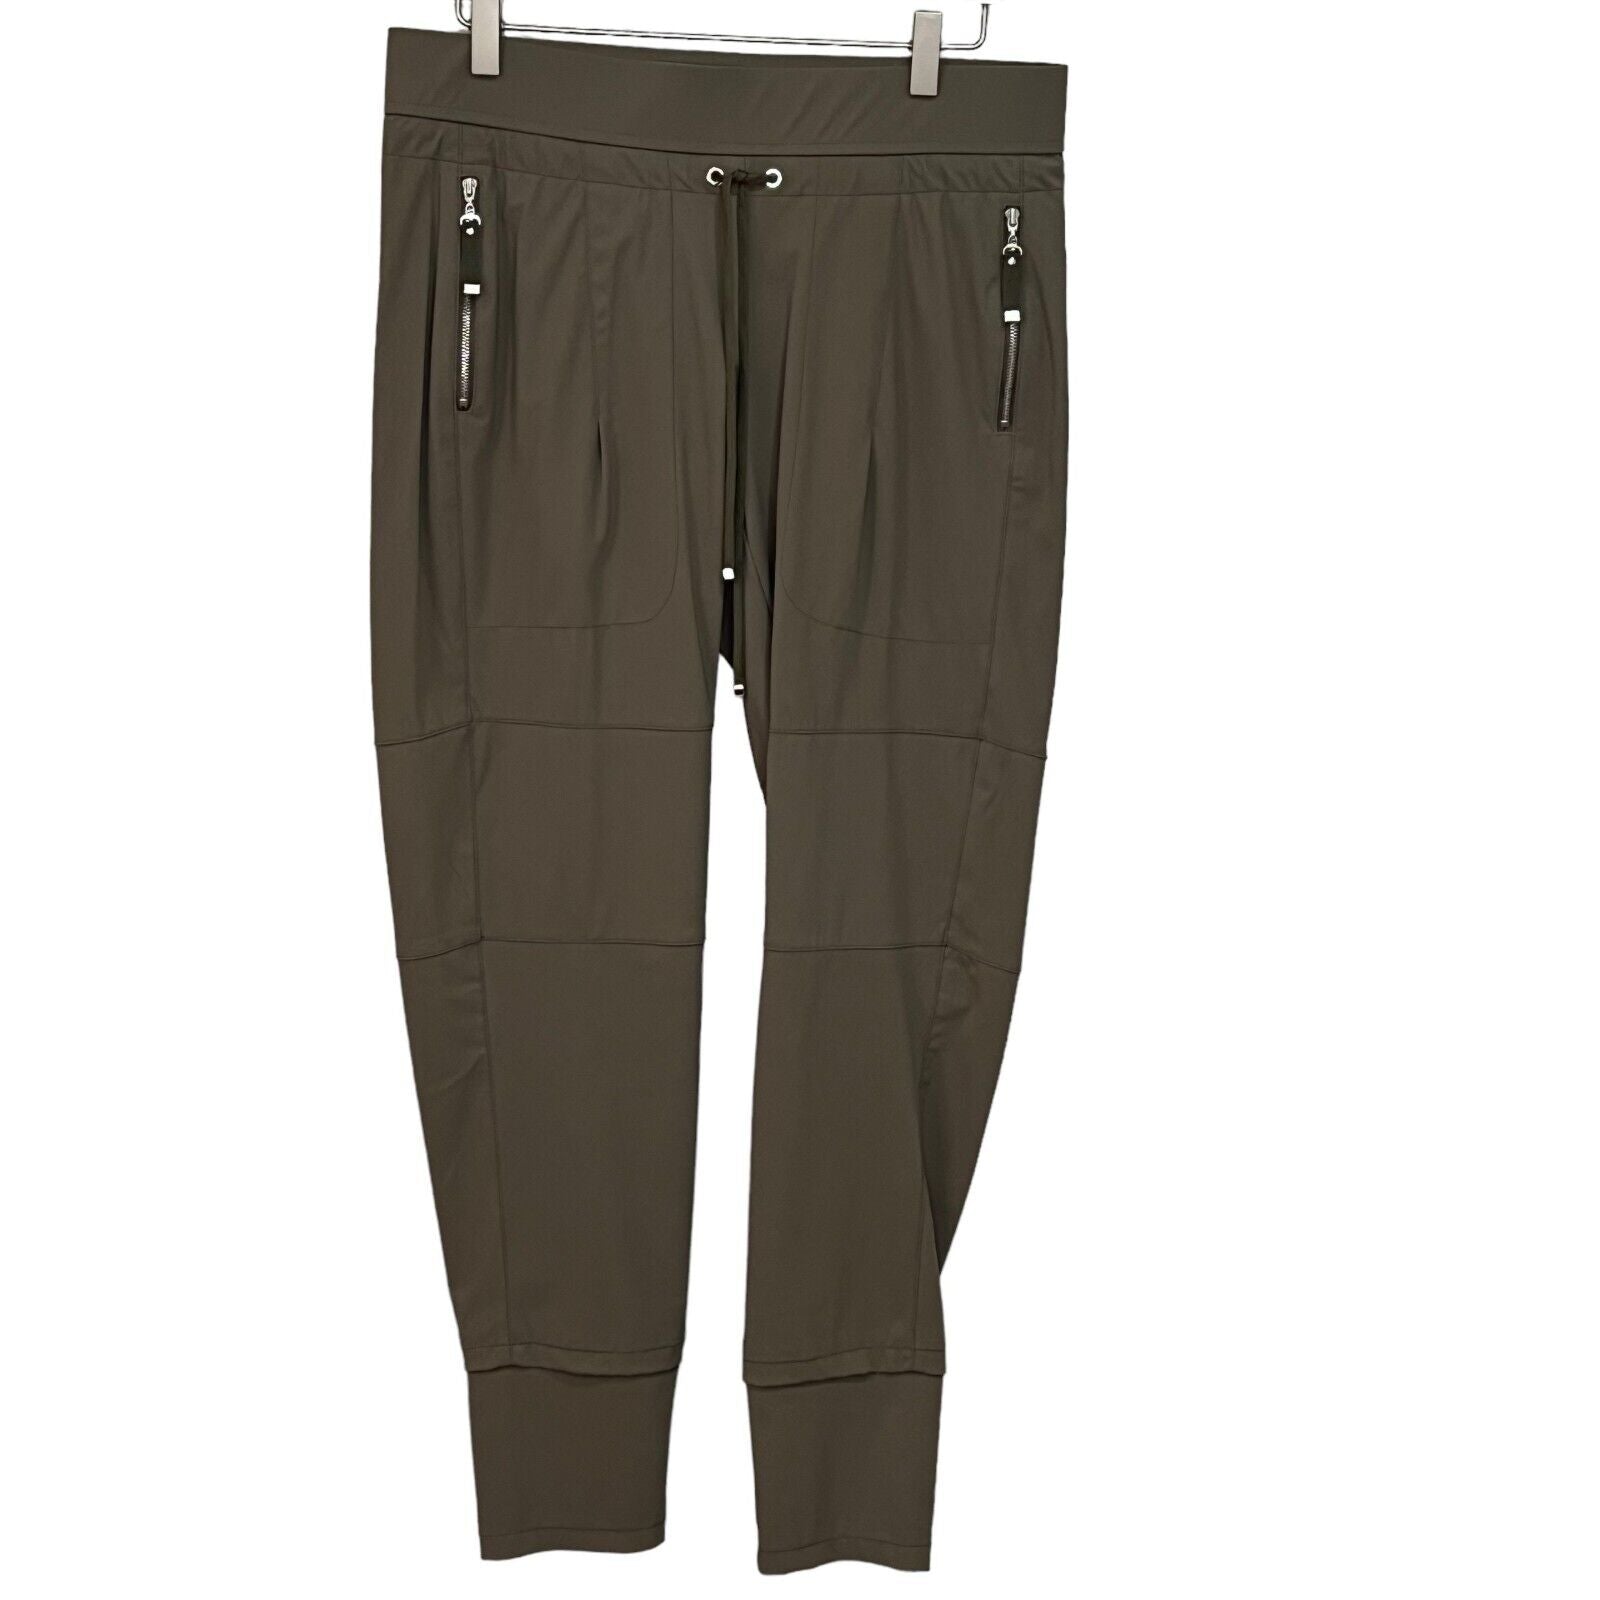 Raffaello Rossi Olive Green Candy Jogger Pants Size 8 (38) NEW $275